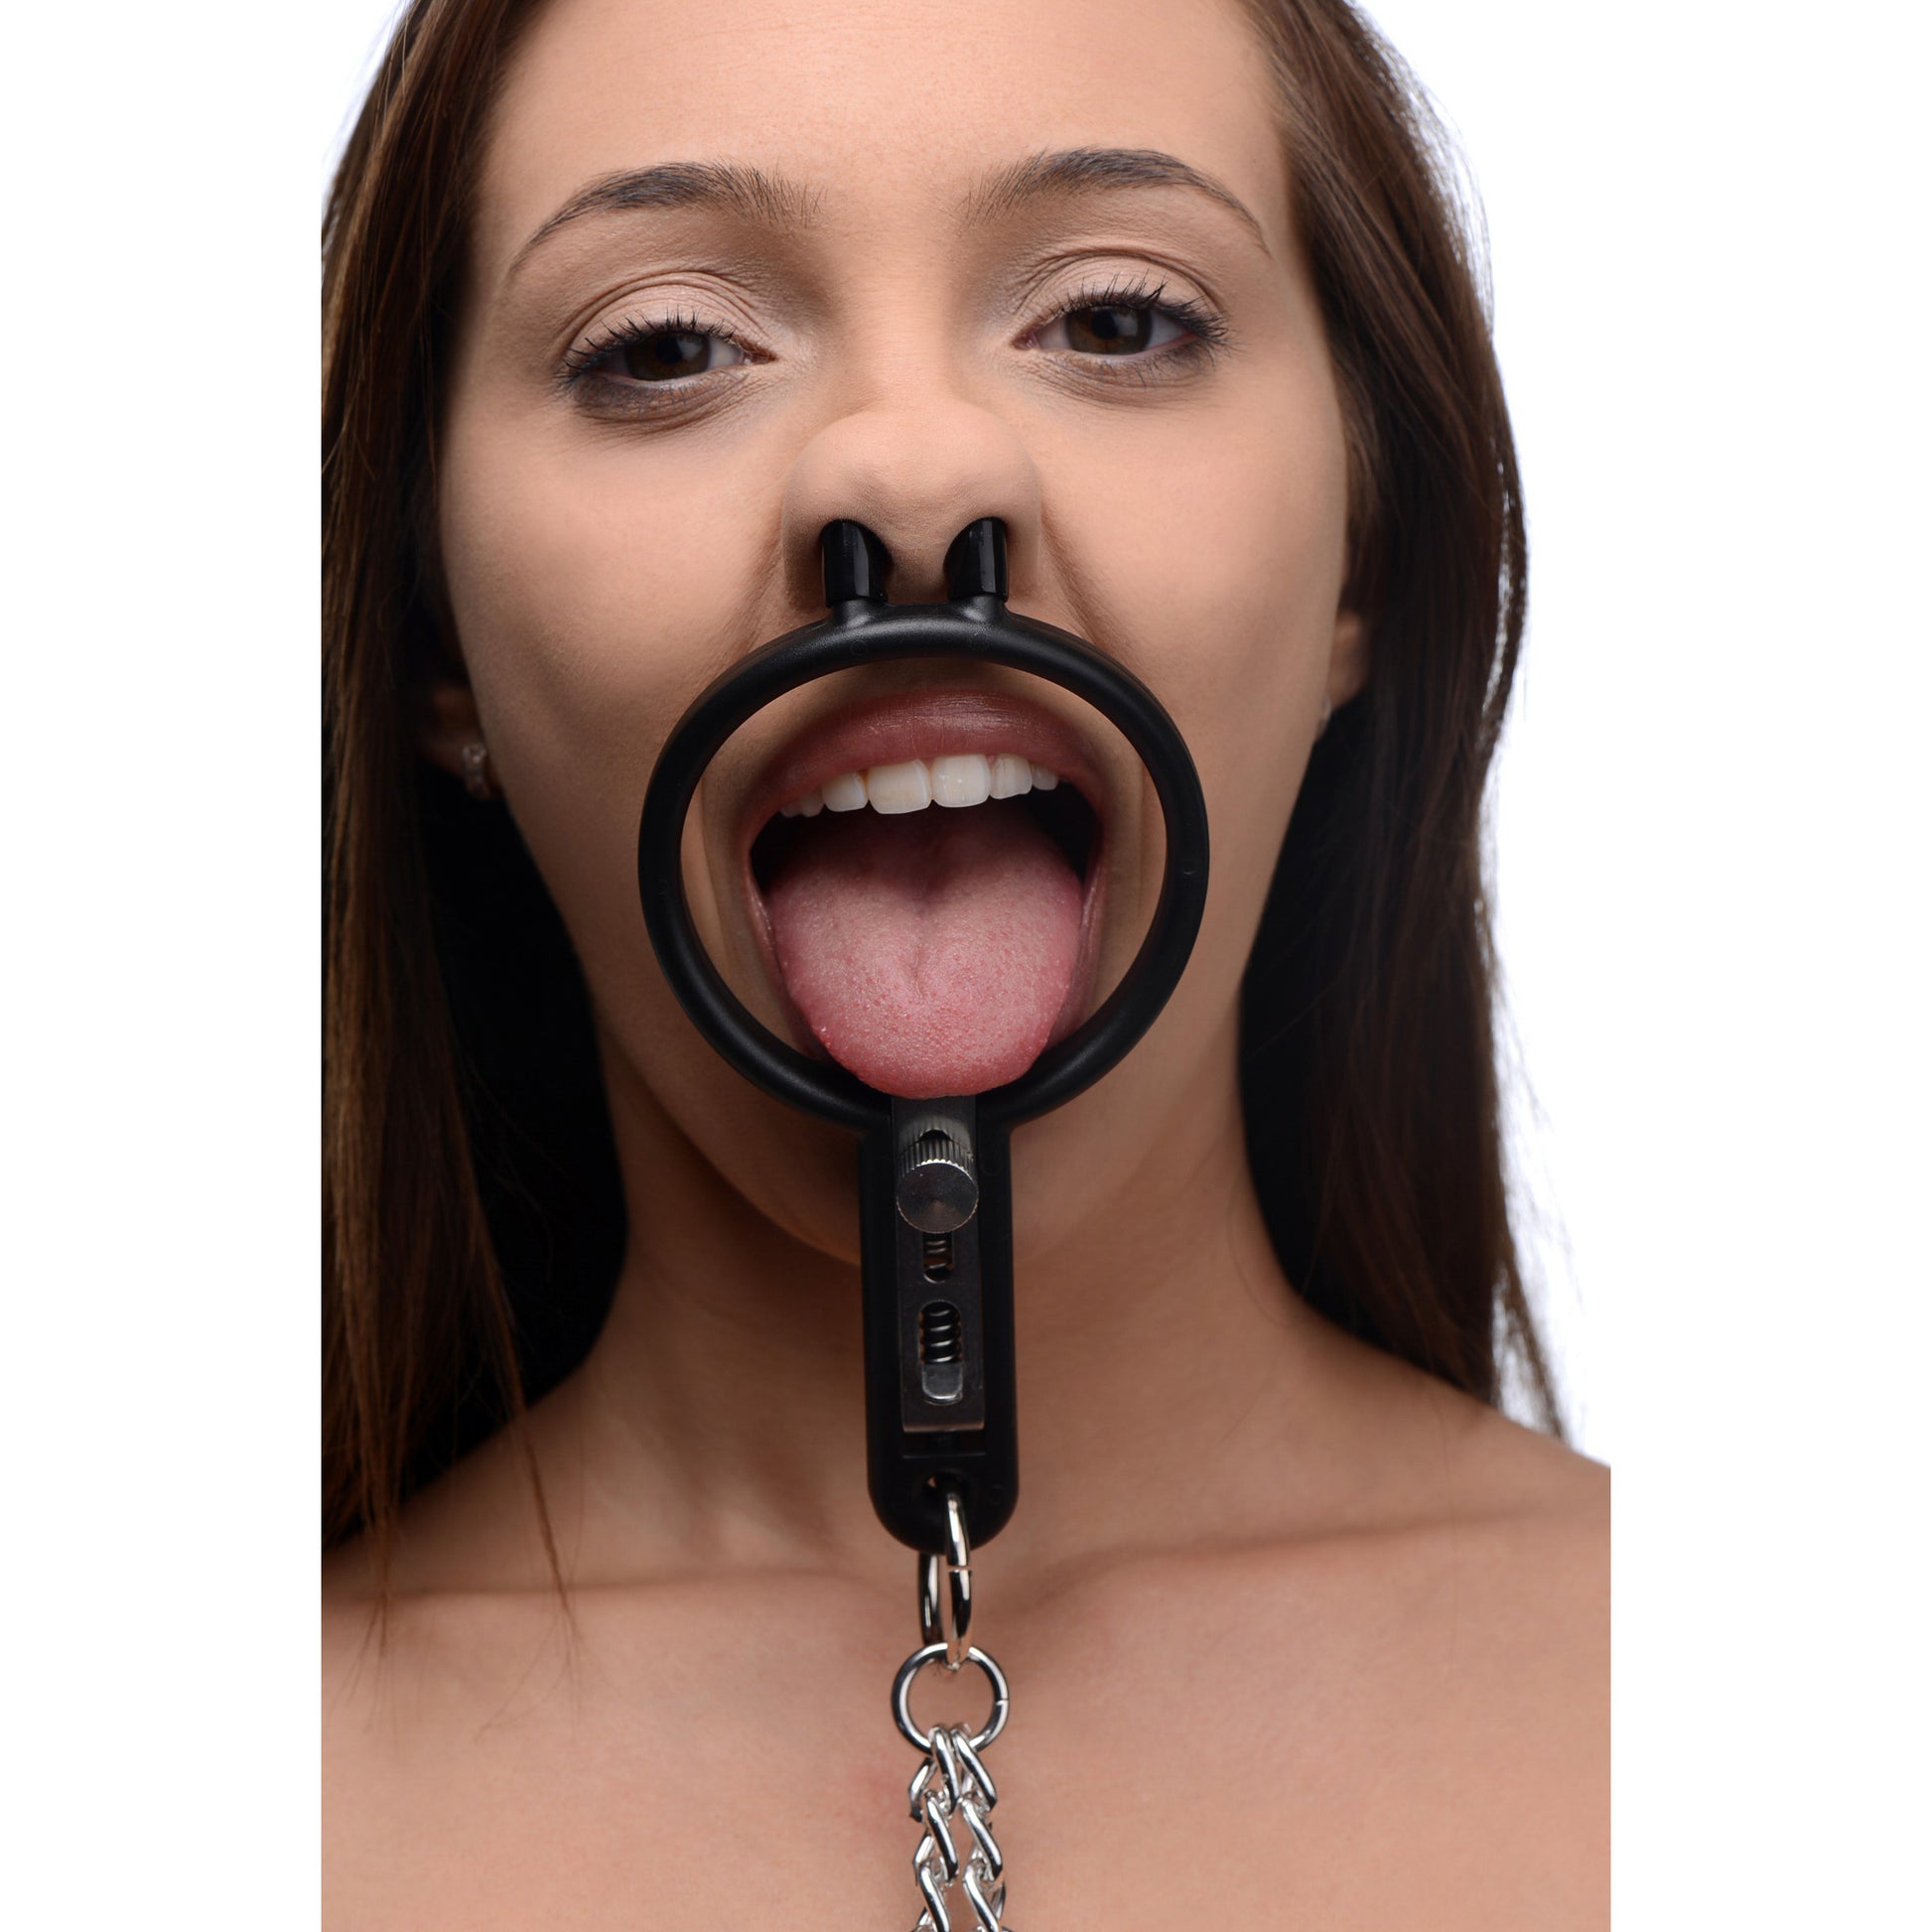 Degraded Mouth Spreader with Nipple Clamps - UABDSM